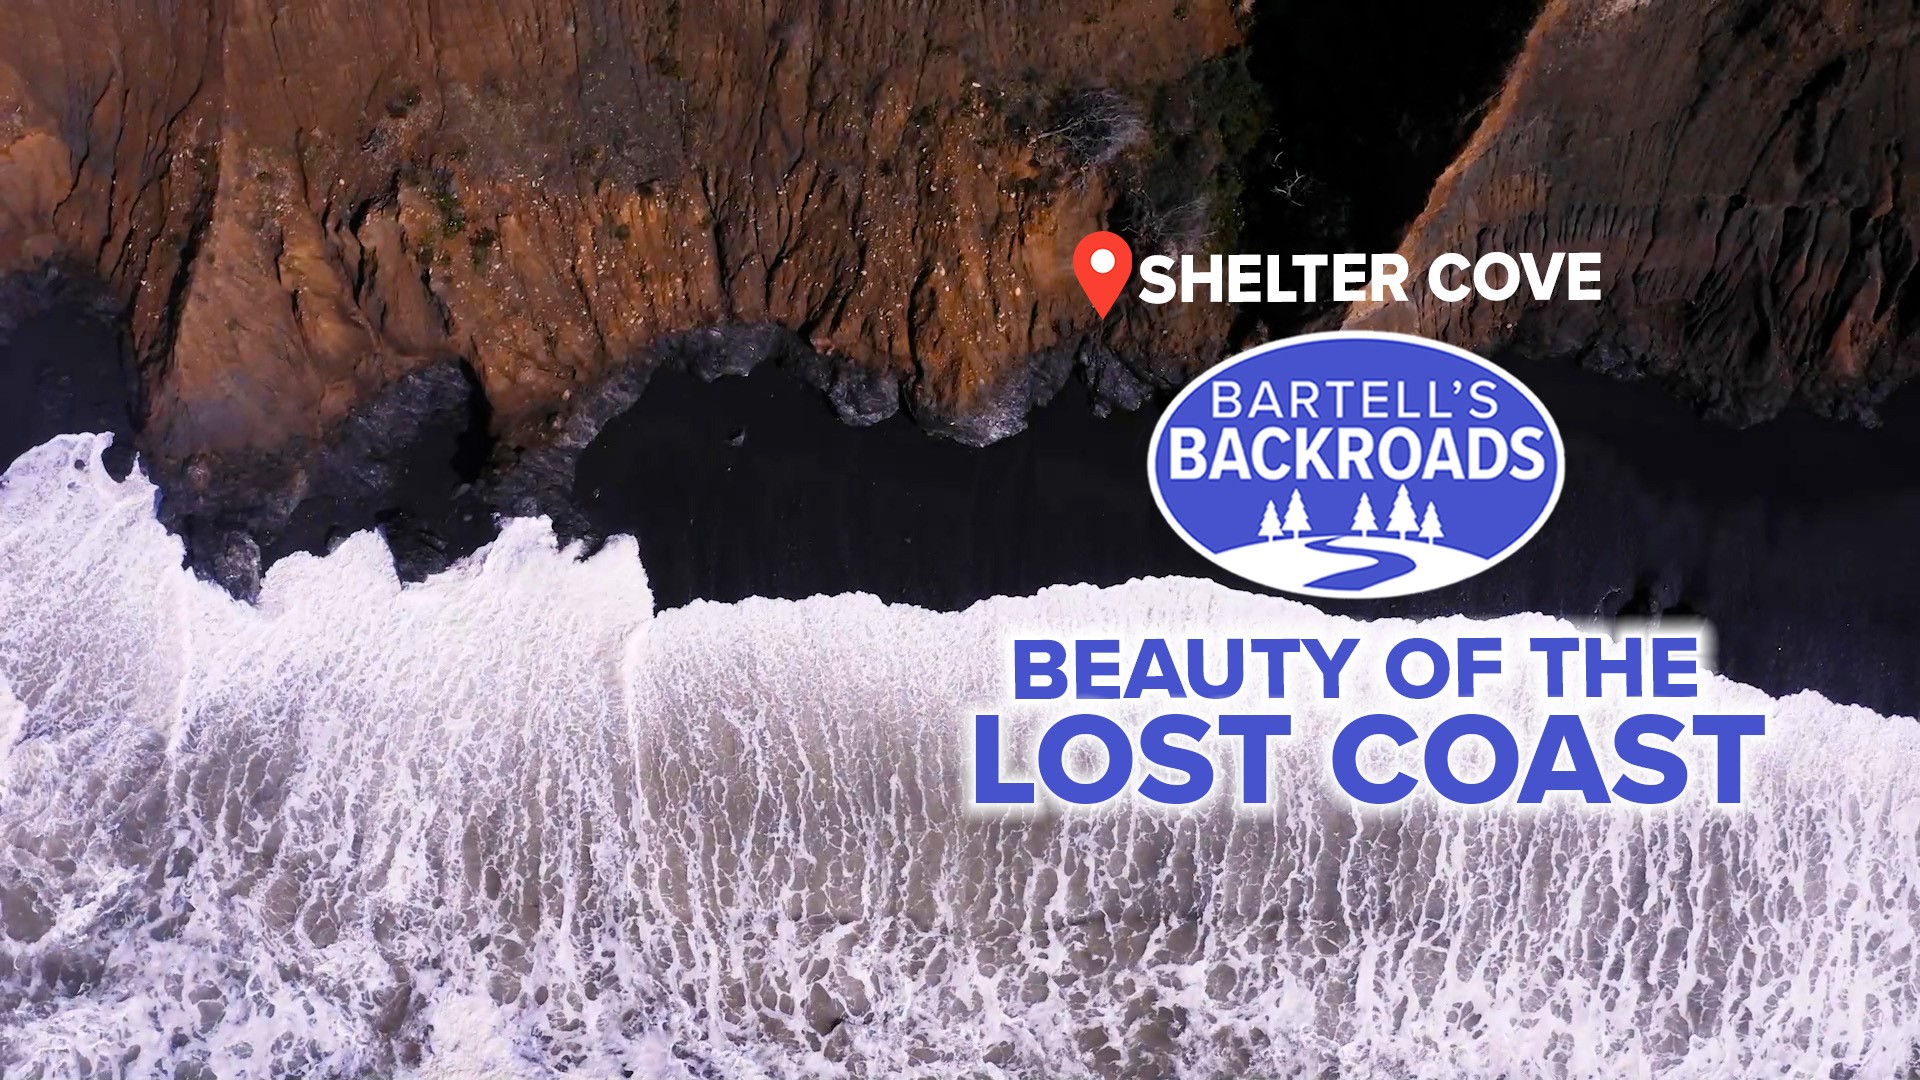 A visit to Shelter Cove, the remote Northern California town in the center of the Lost Coast.